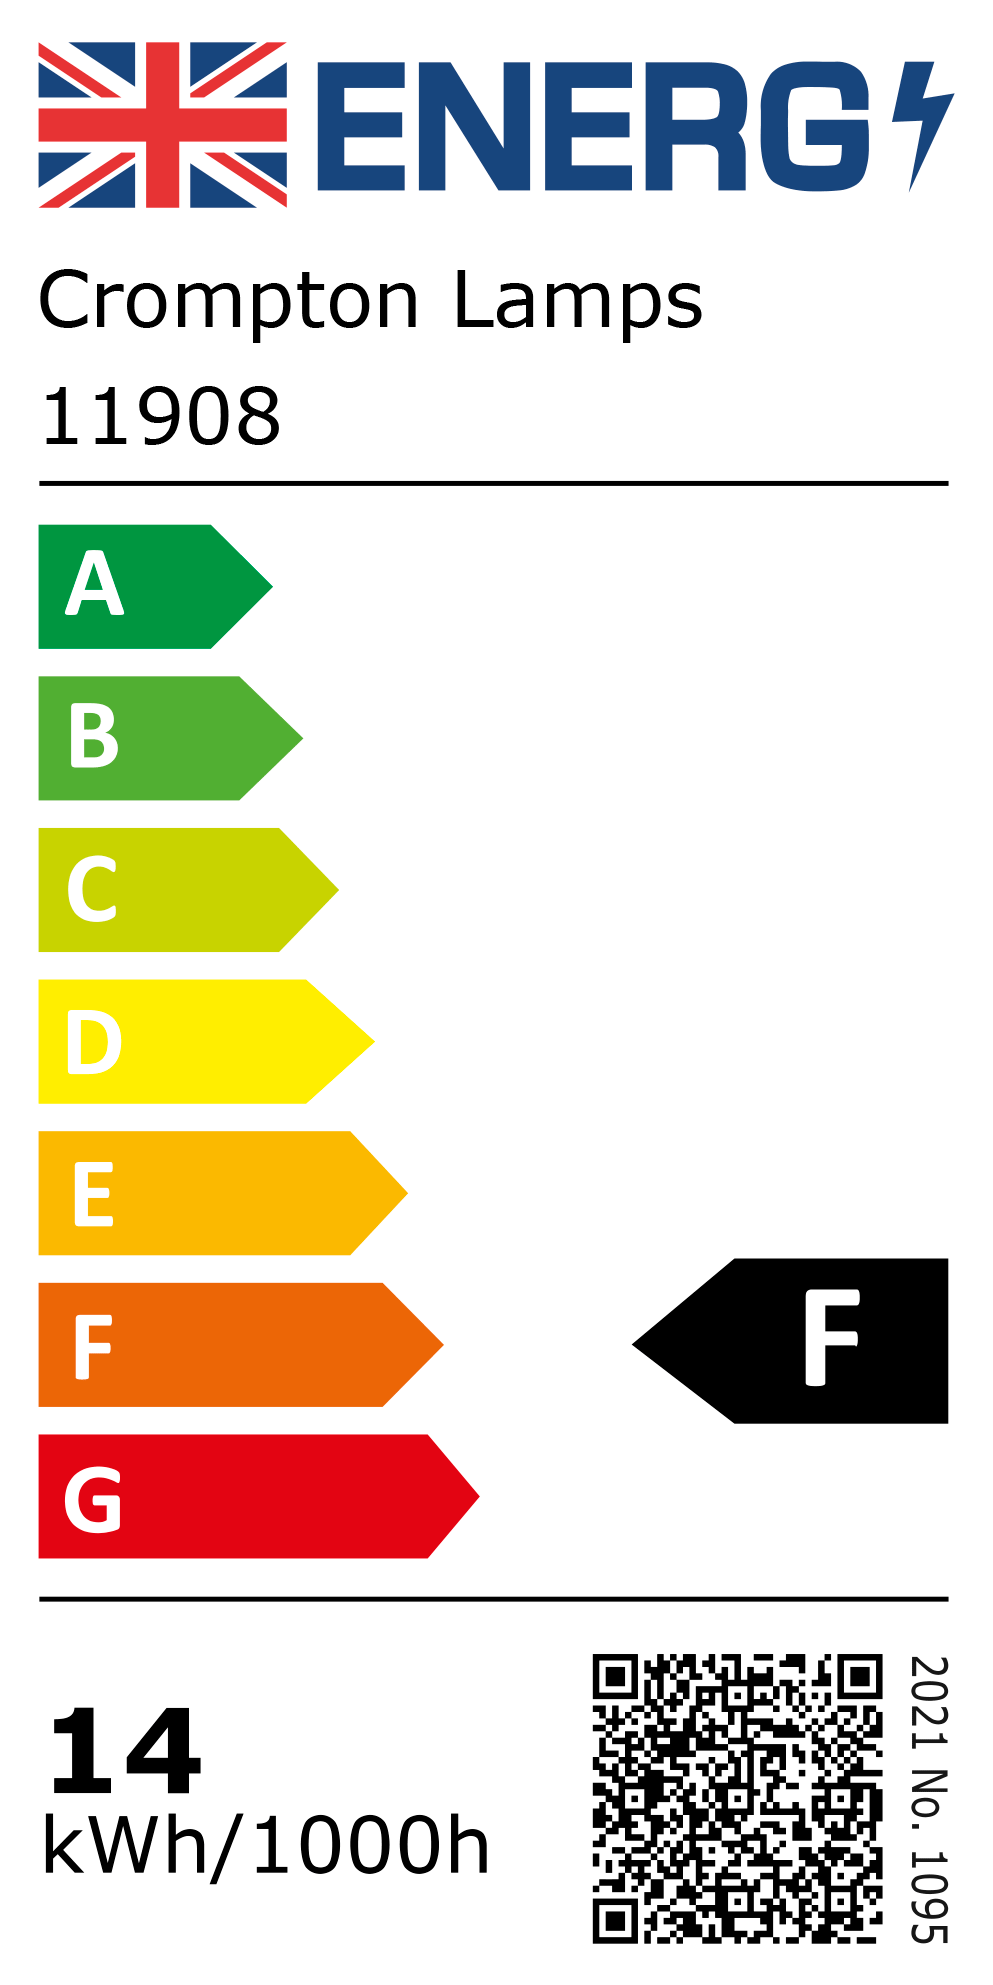 New 2021 Energy Rating Label: Stock Code 11908